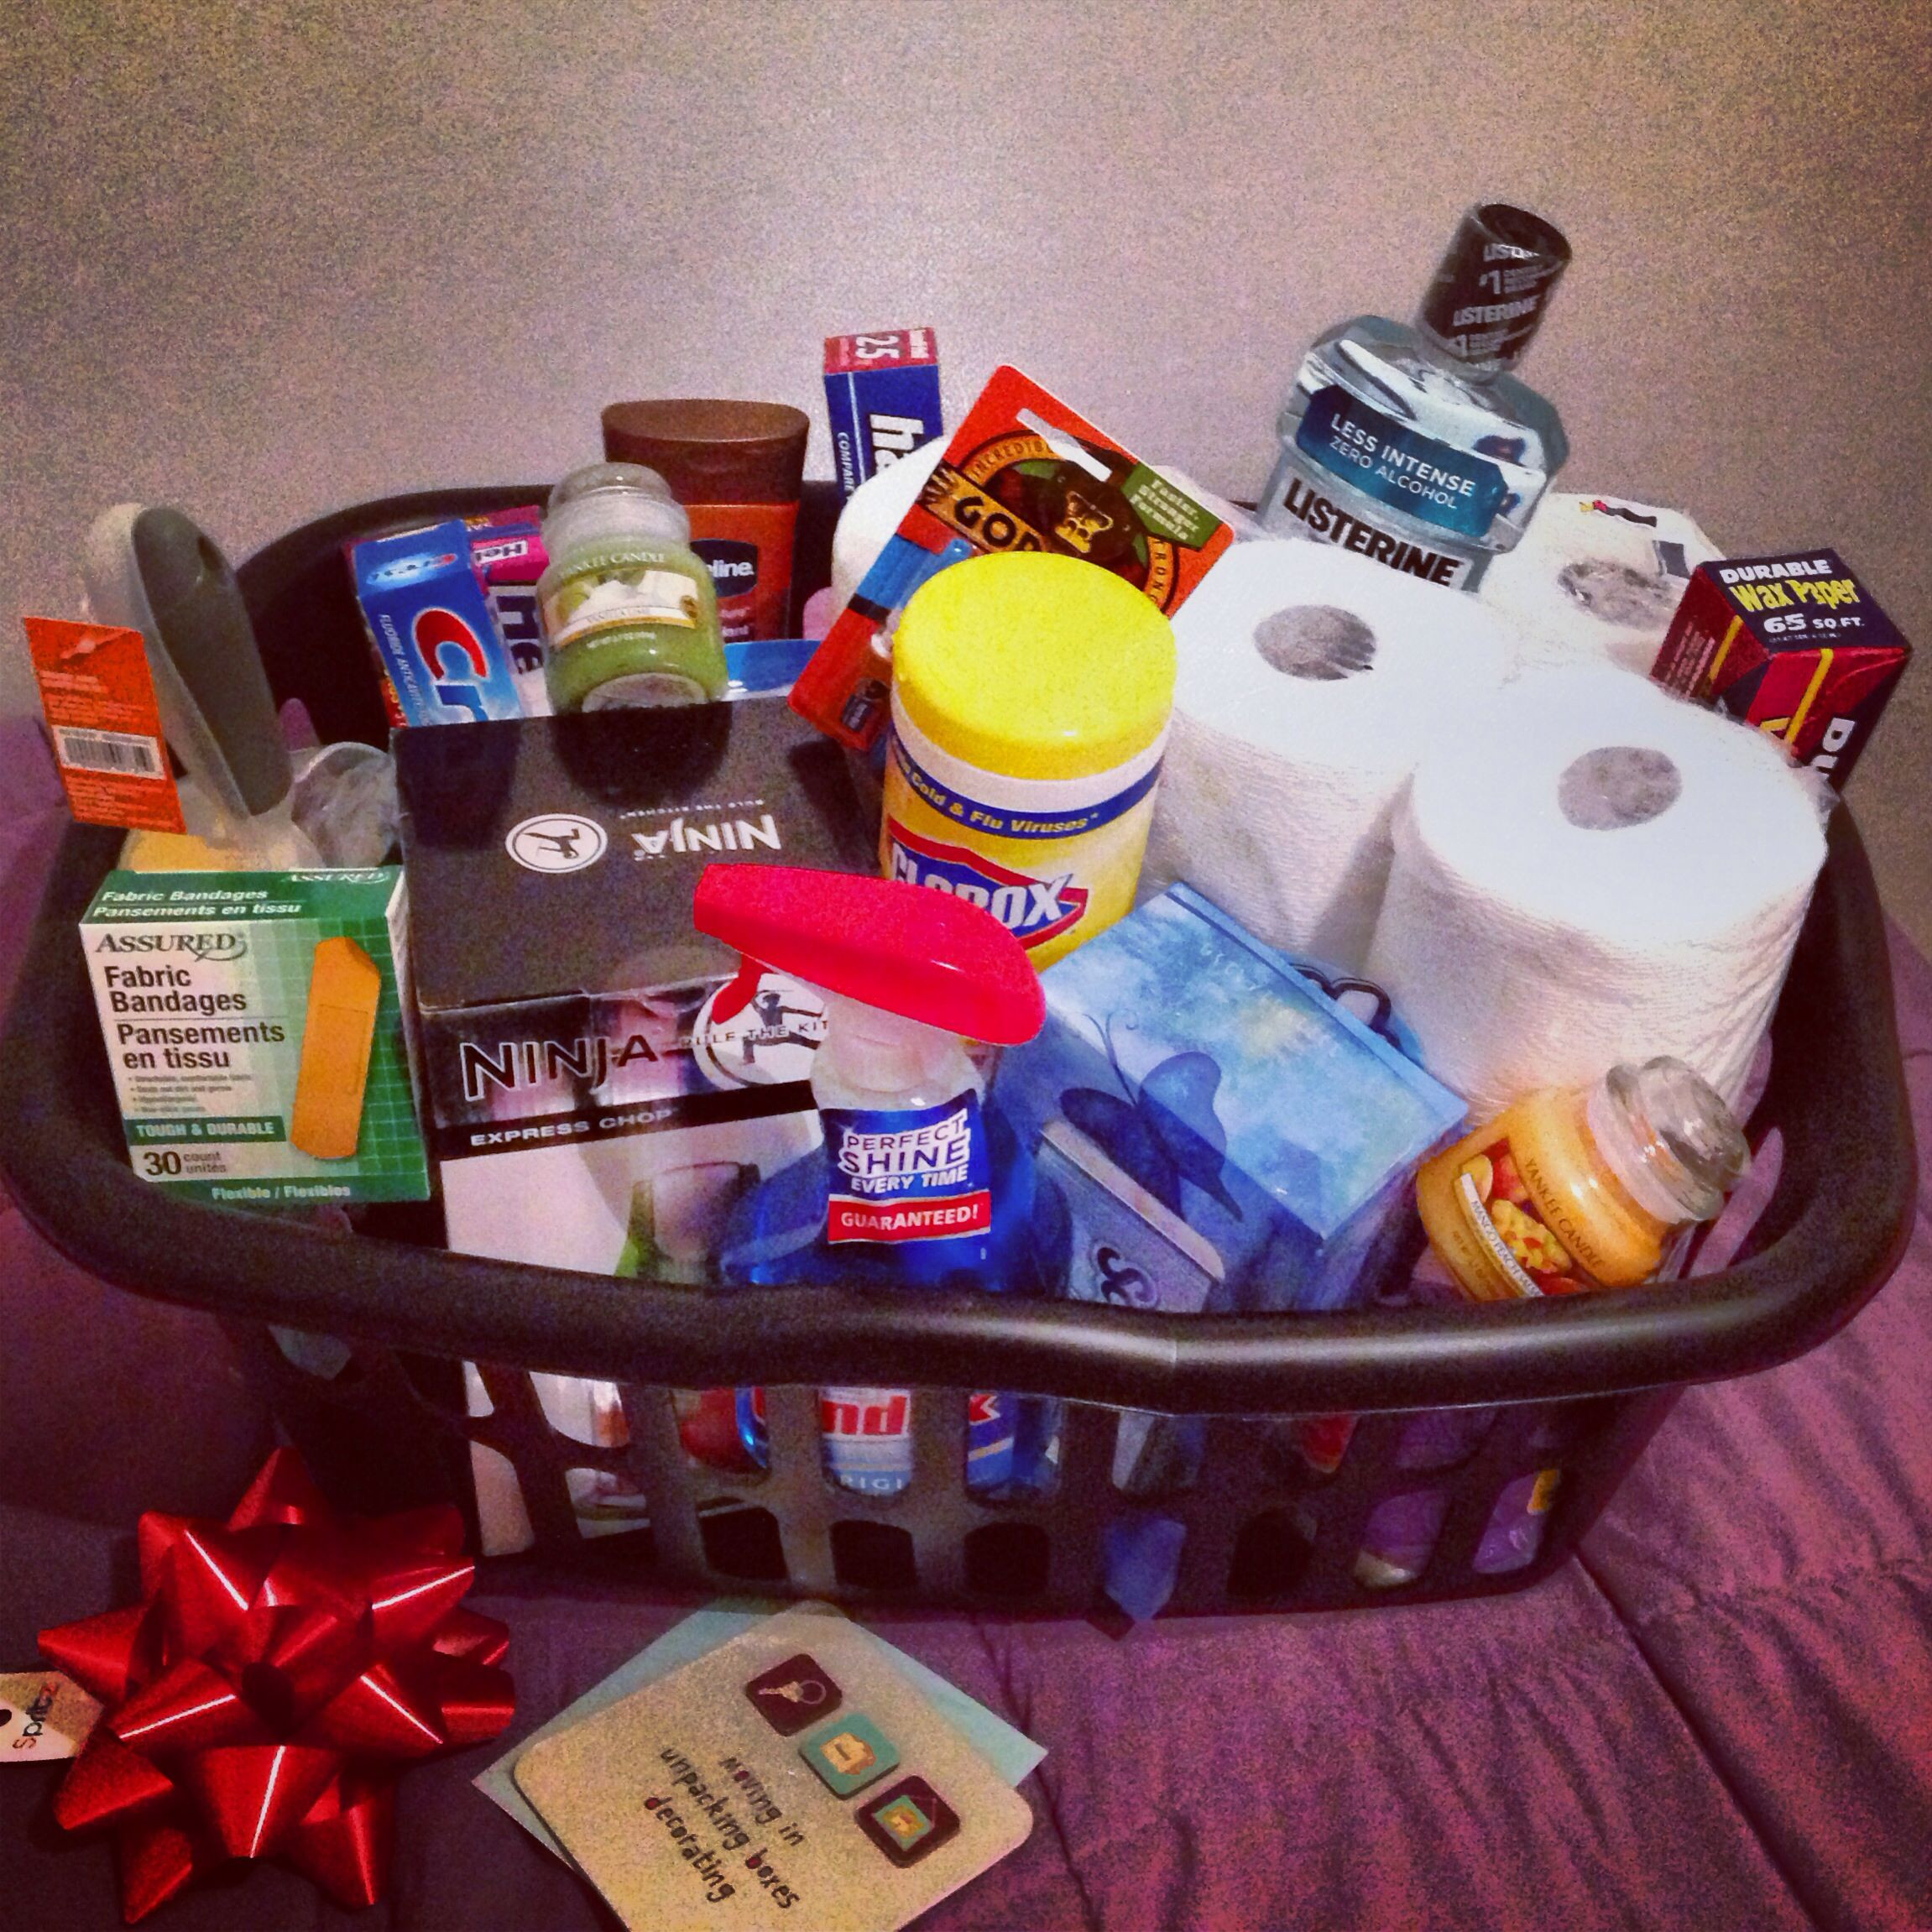 New Home Gift Basket Ideas
 DIY Housewarming t basket include household